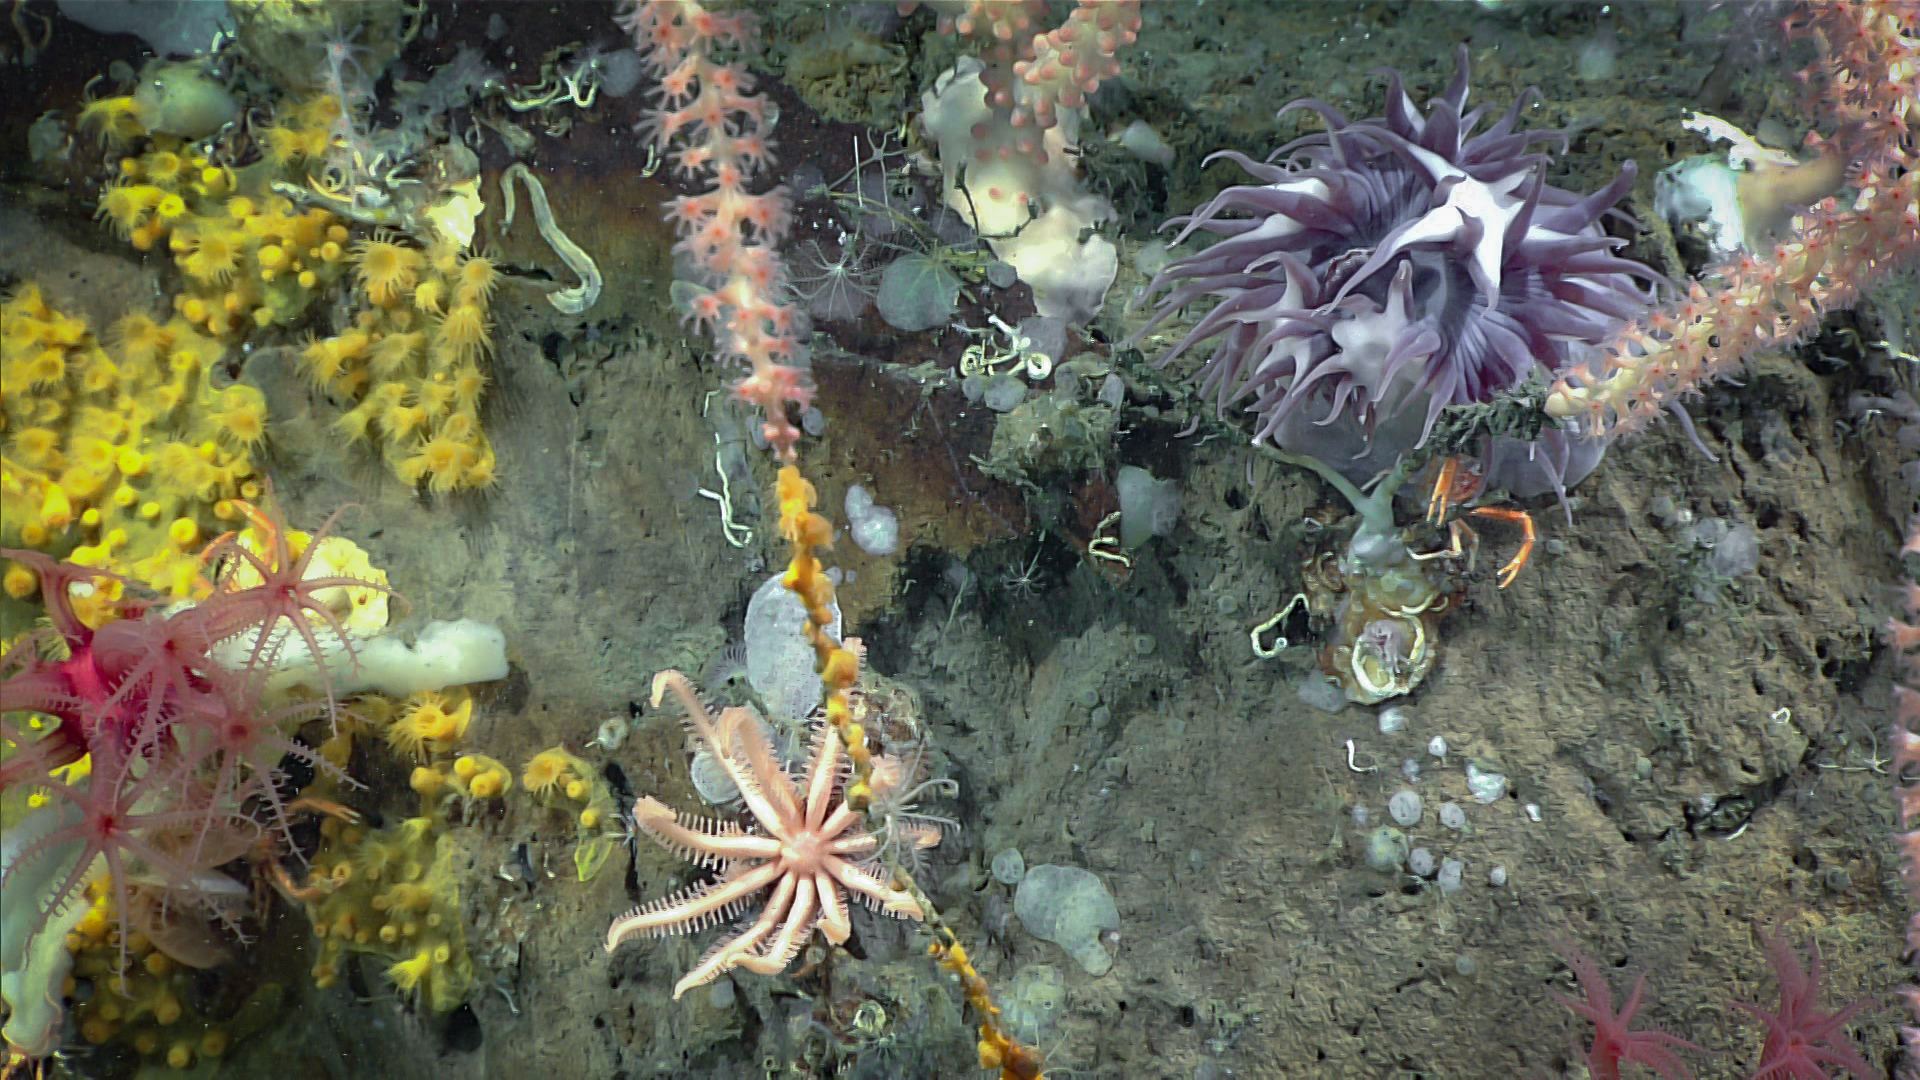 Close-up view of a diverse group of marine live documented by NOAA Ocean Exploration in 2019 during an ROV dive inside the Gully Canyon in the Atlantic Ocean